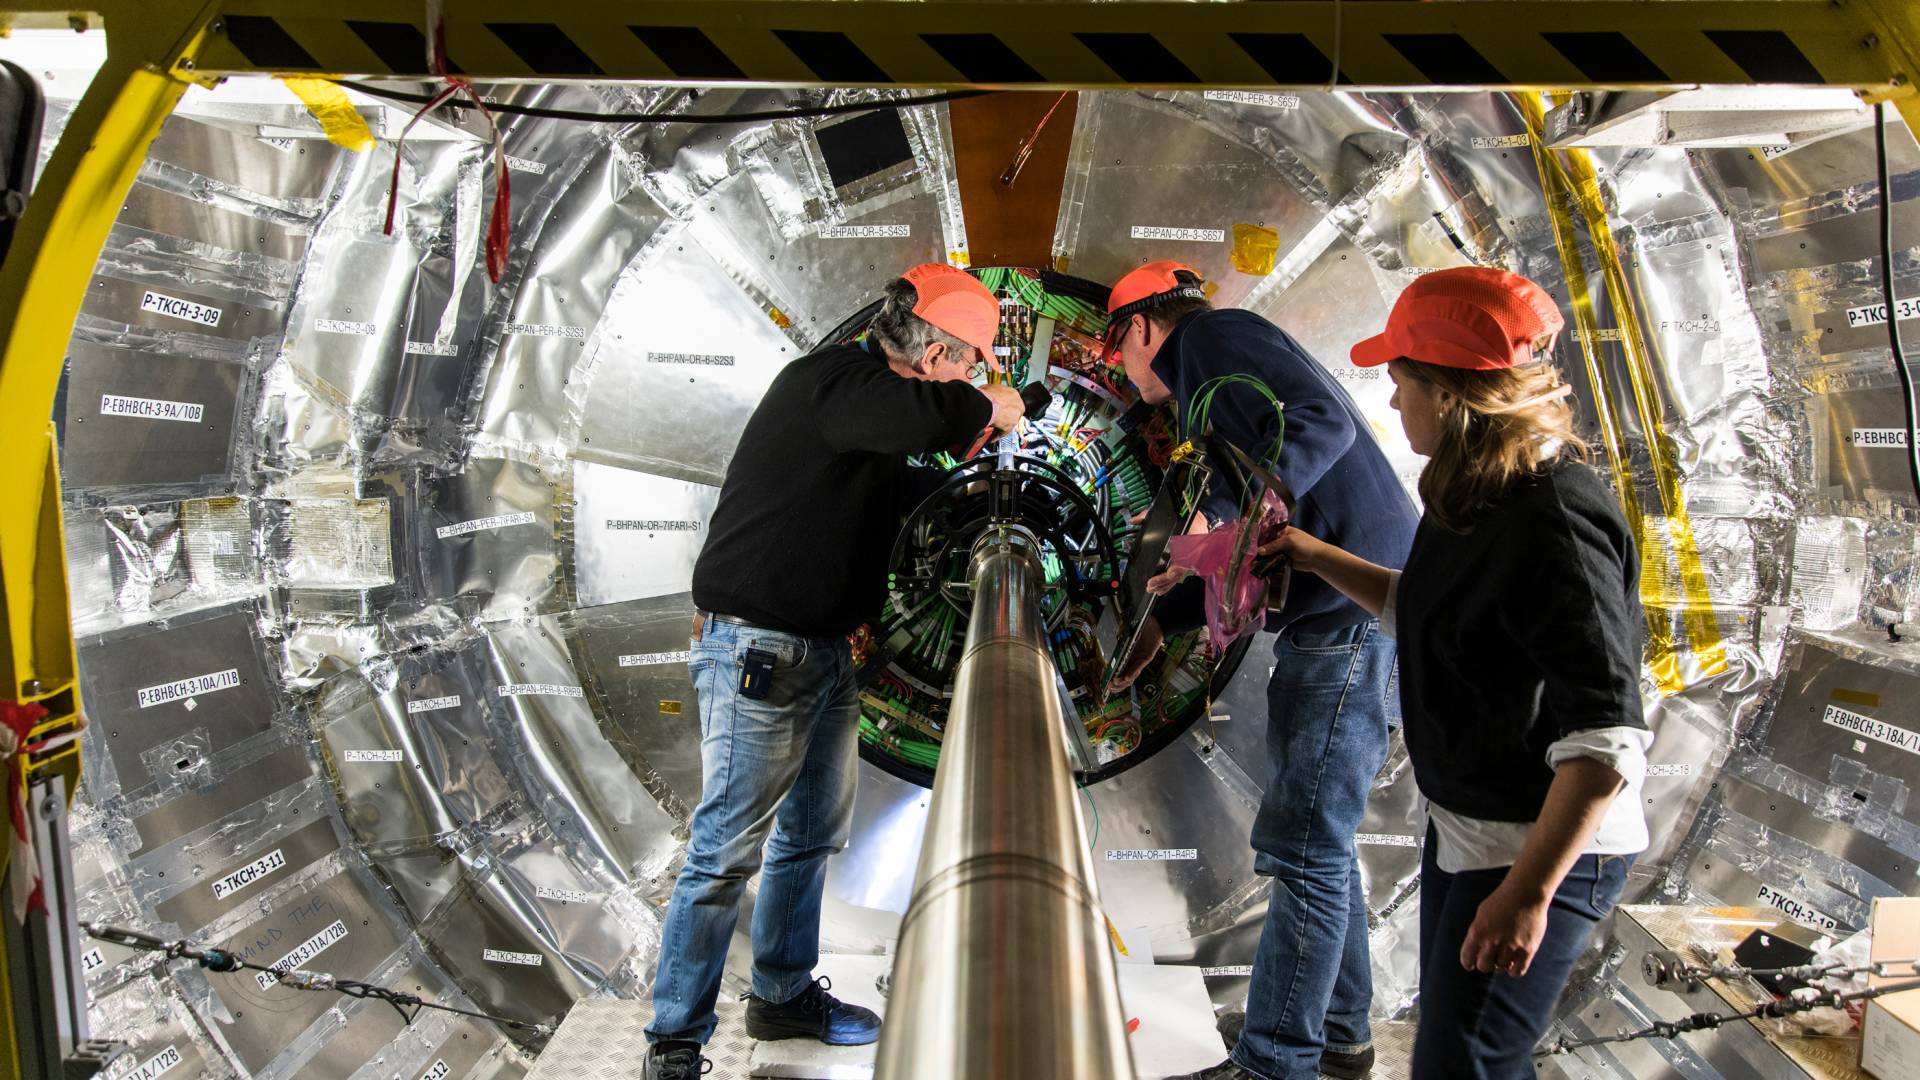 Princeton physicists and engineers work on the installation of the pixel luminosity telescope of the CMS experiment